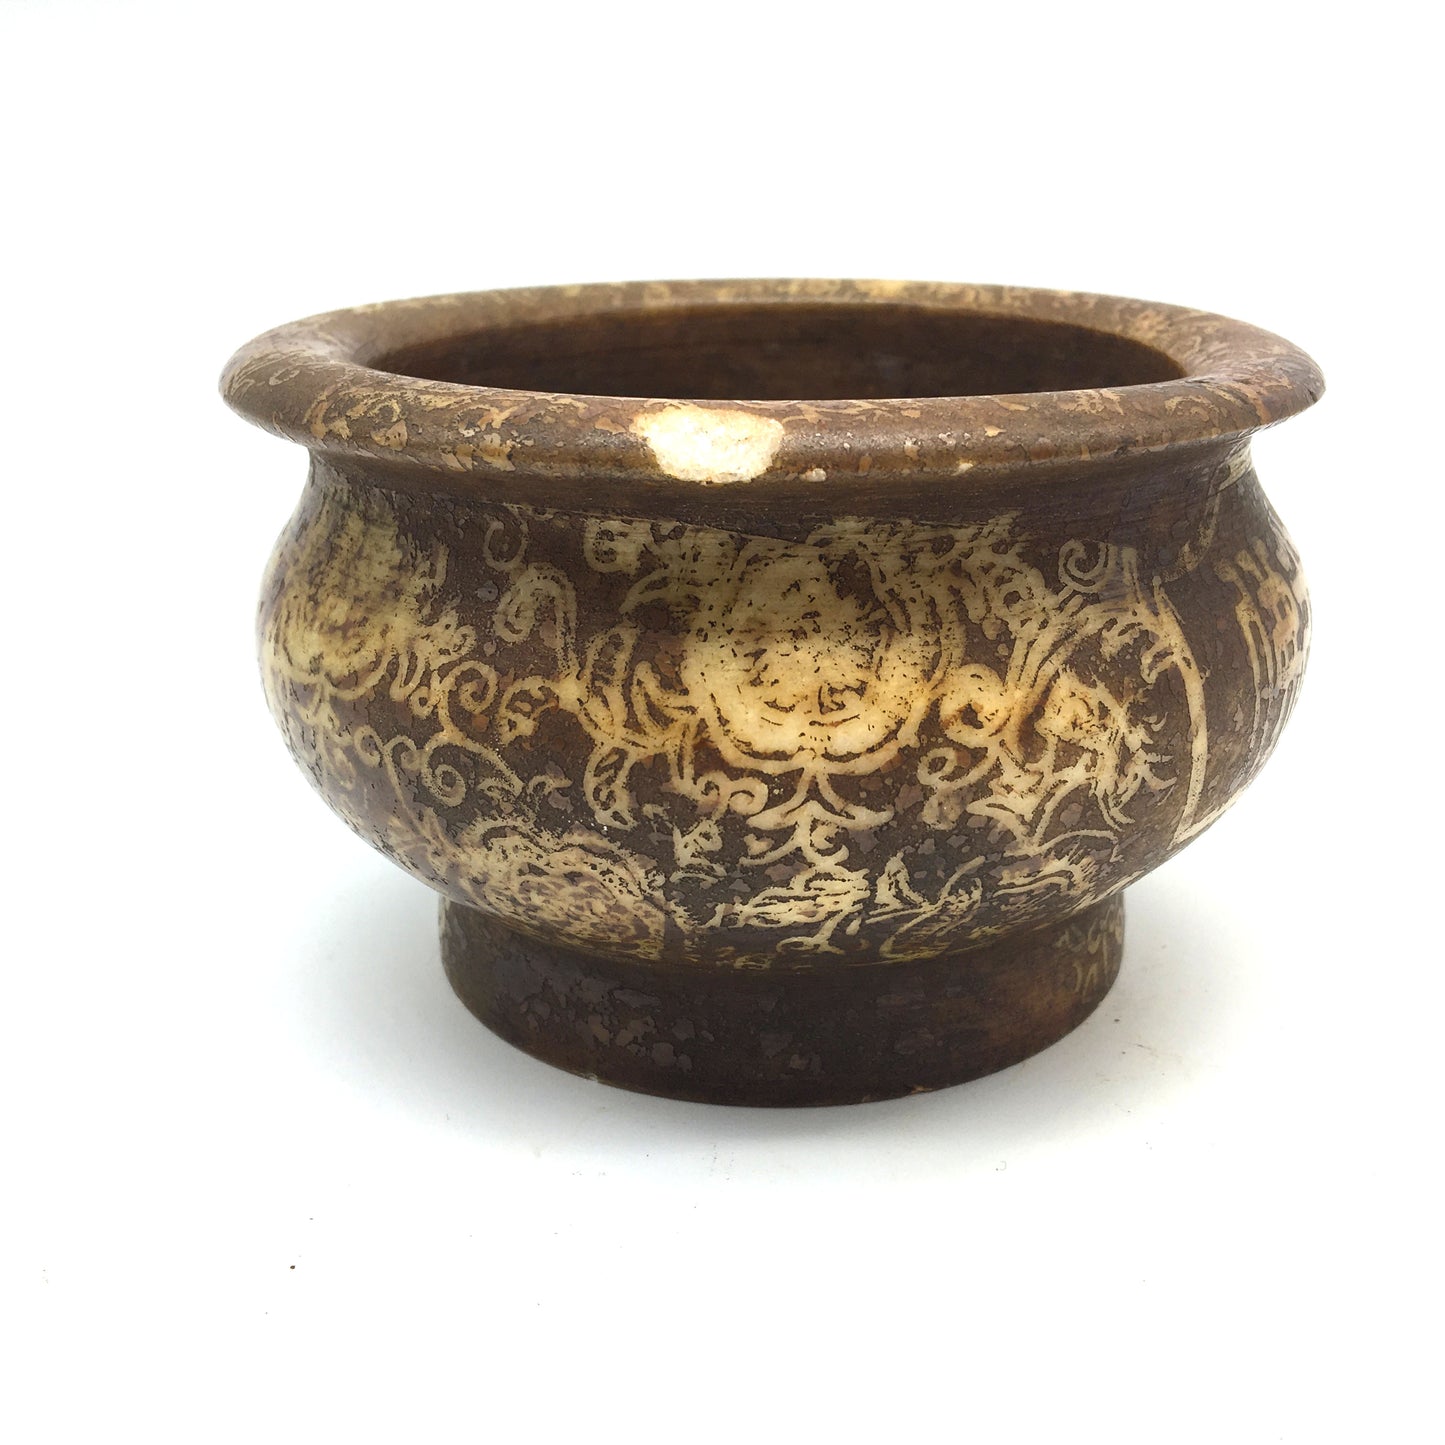 Soapstone Incense Smudging Jade Bowl Pot Natural Henna Colors -Eastern Style